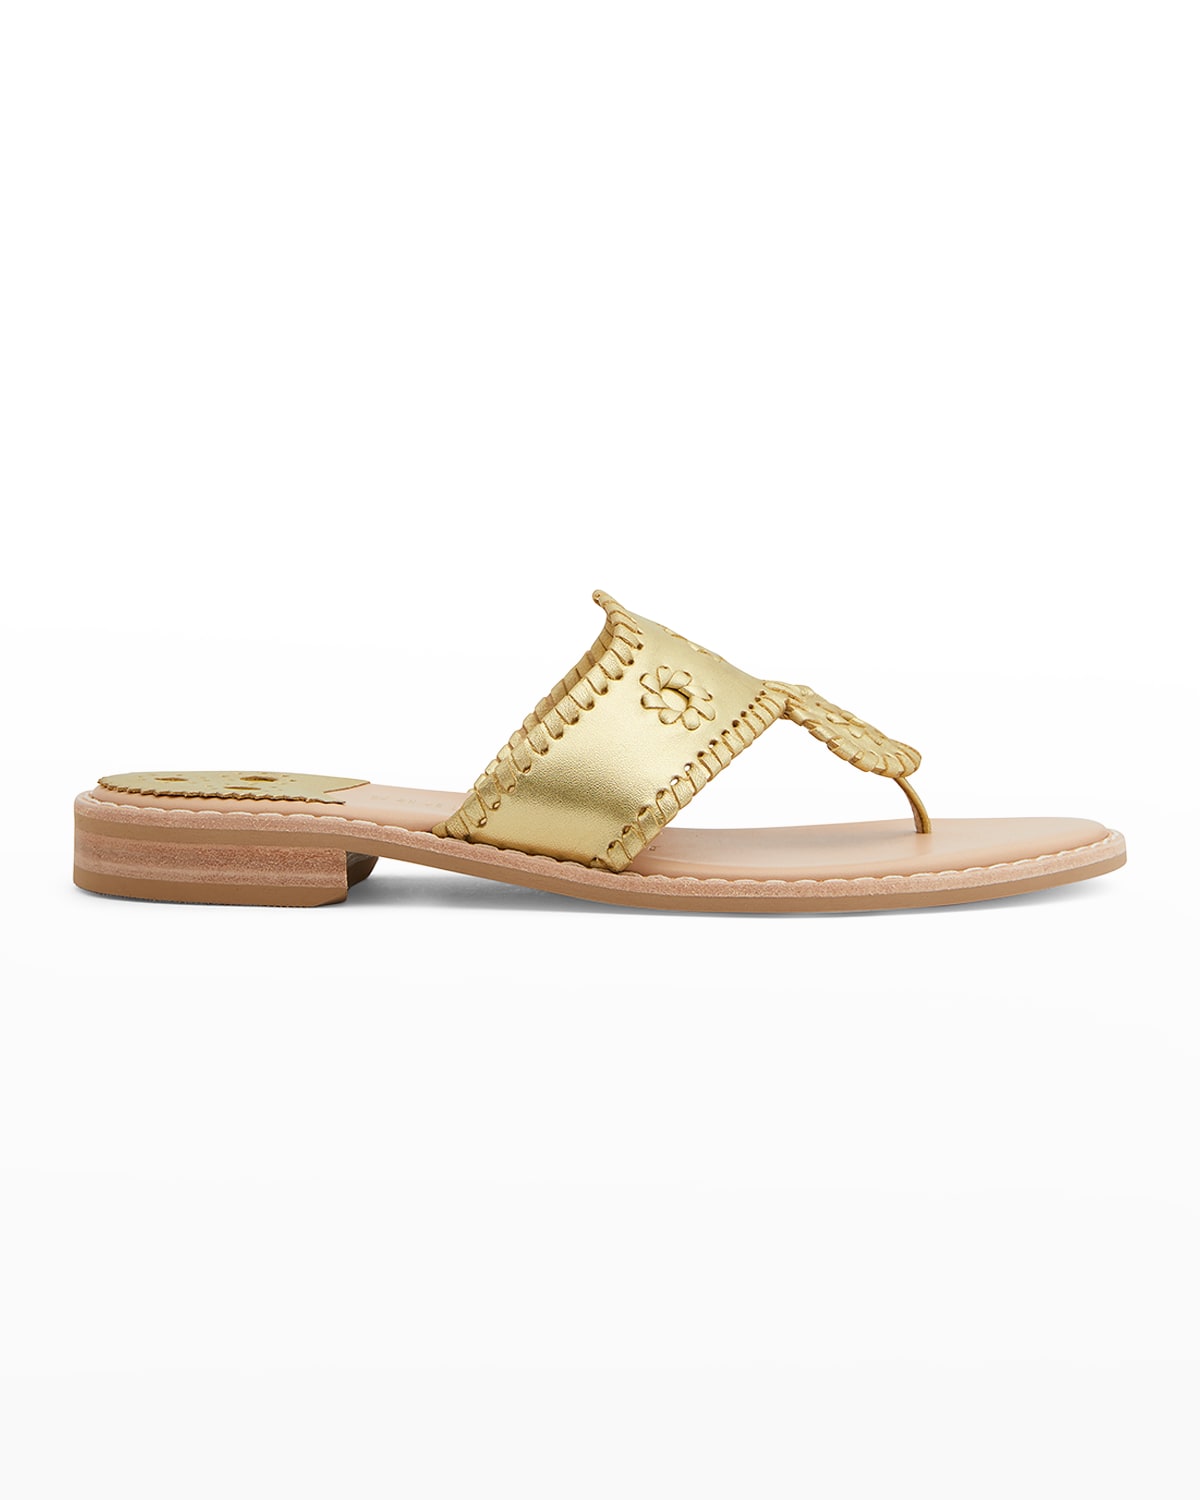 Jack Rogers Jacks Woven Leather Thong Sandals In Gold/gold